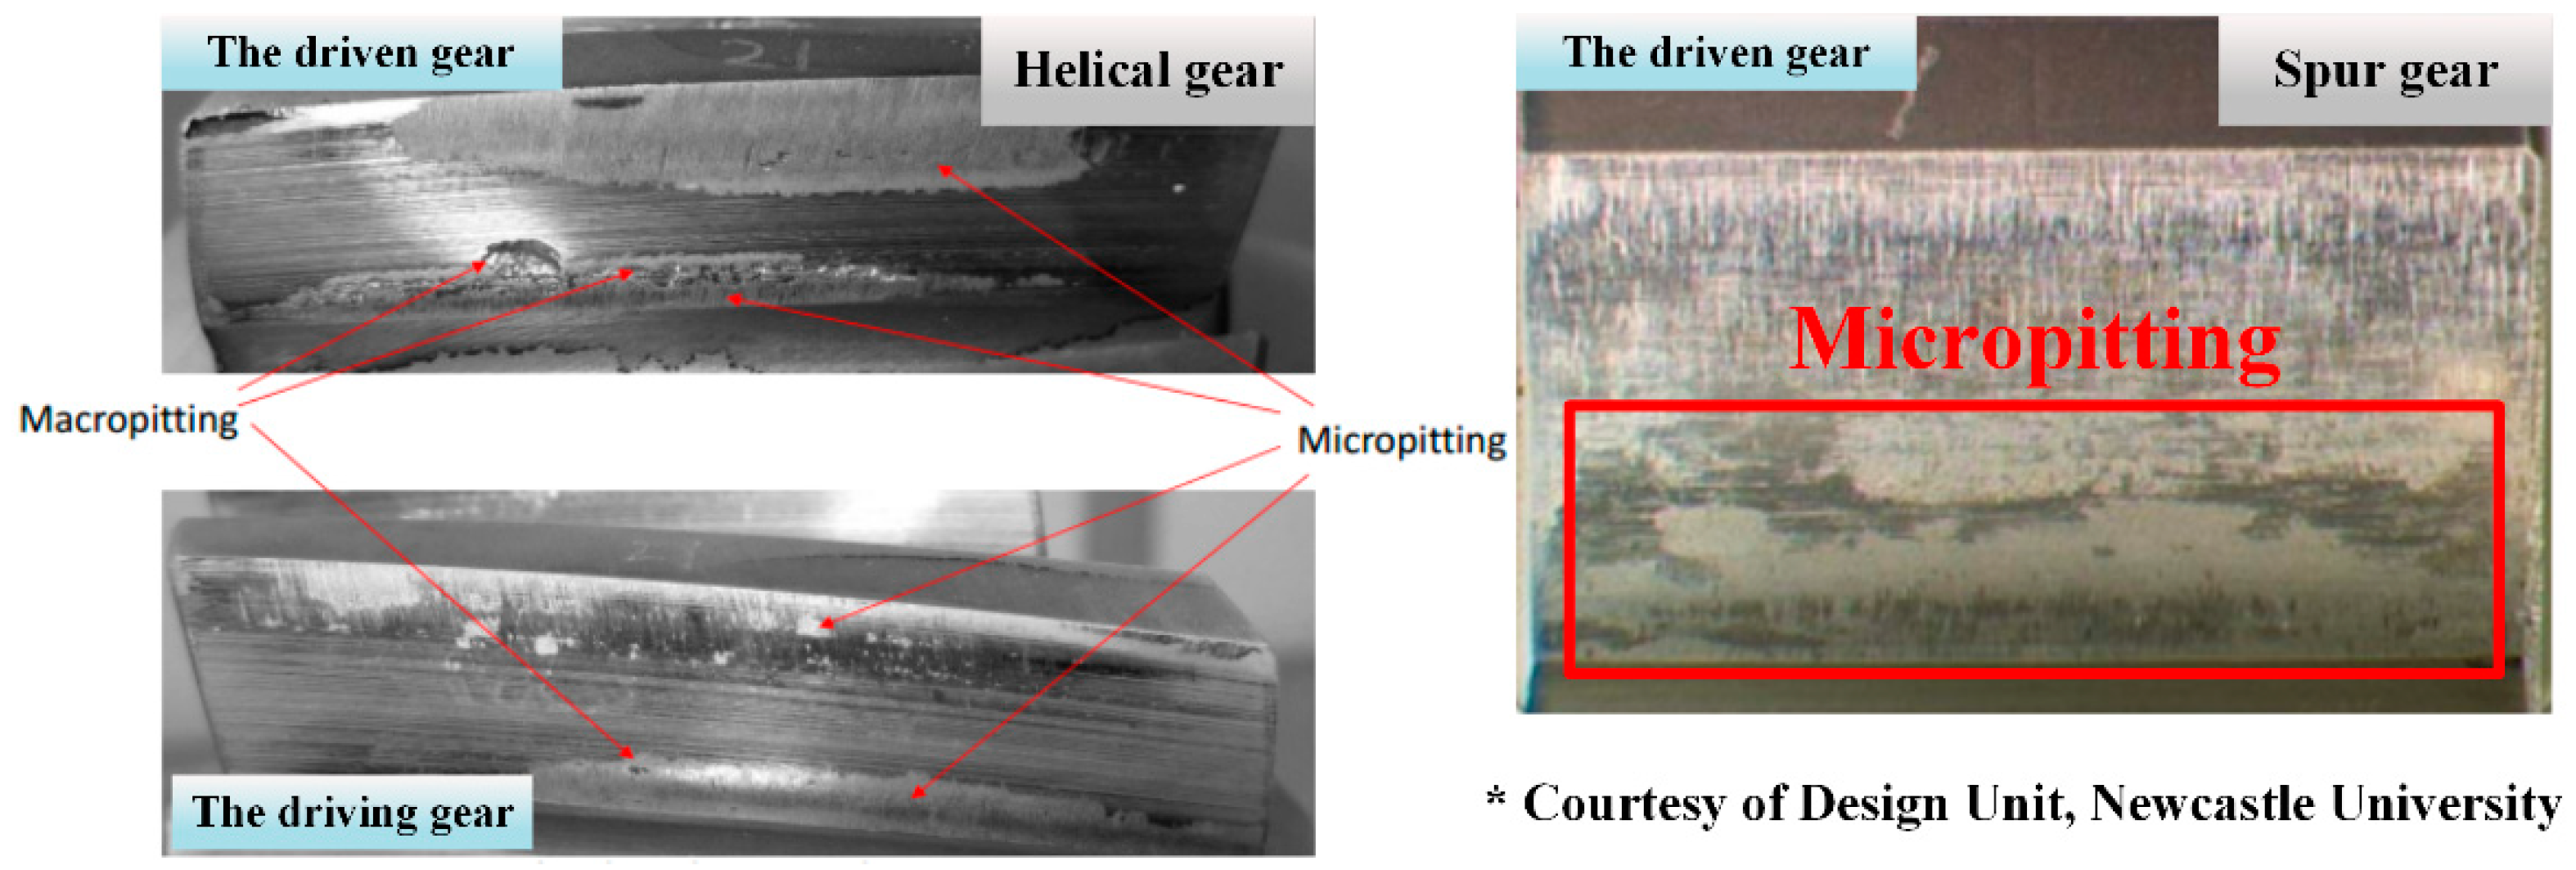 Coatings | Free Full-Text | A Review on Micropitting Studies of Steel Gears  | HTML